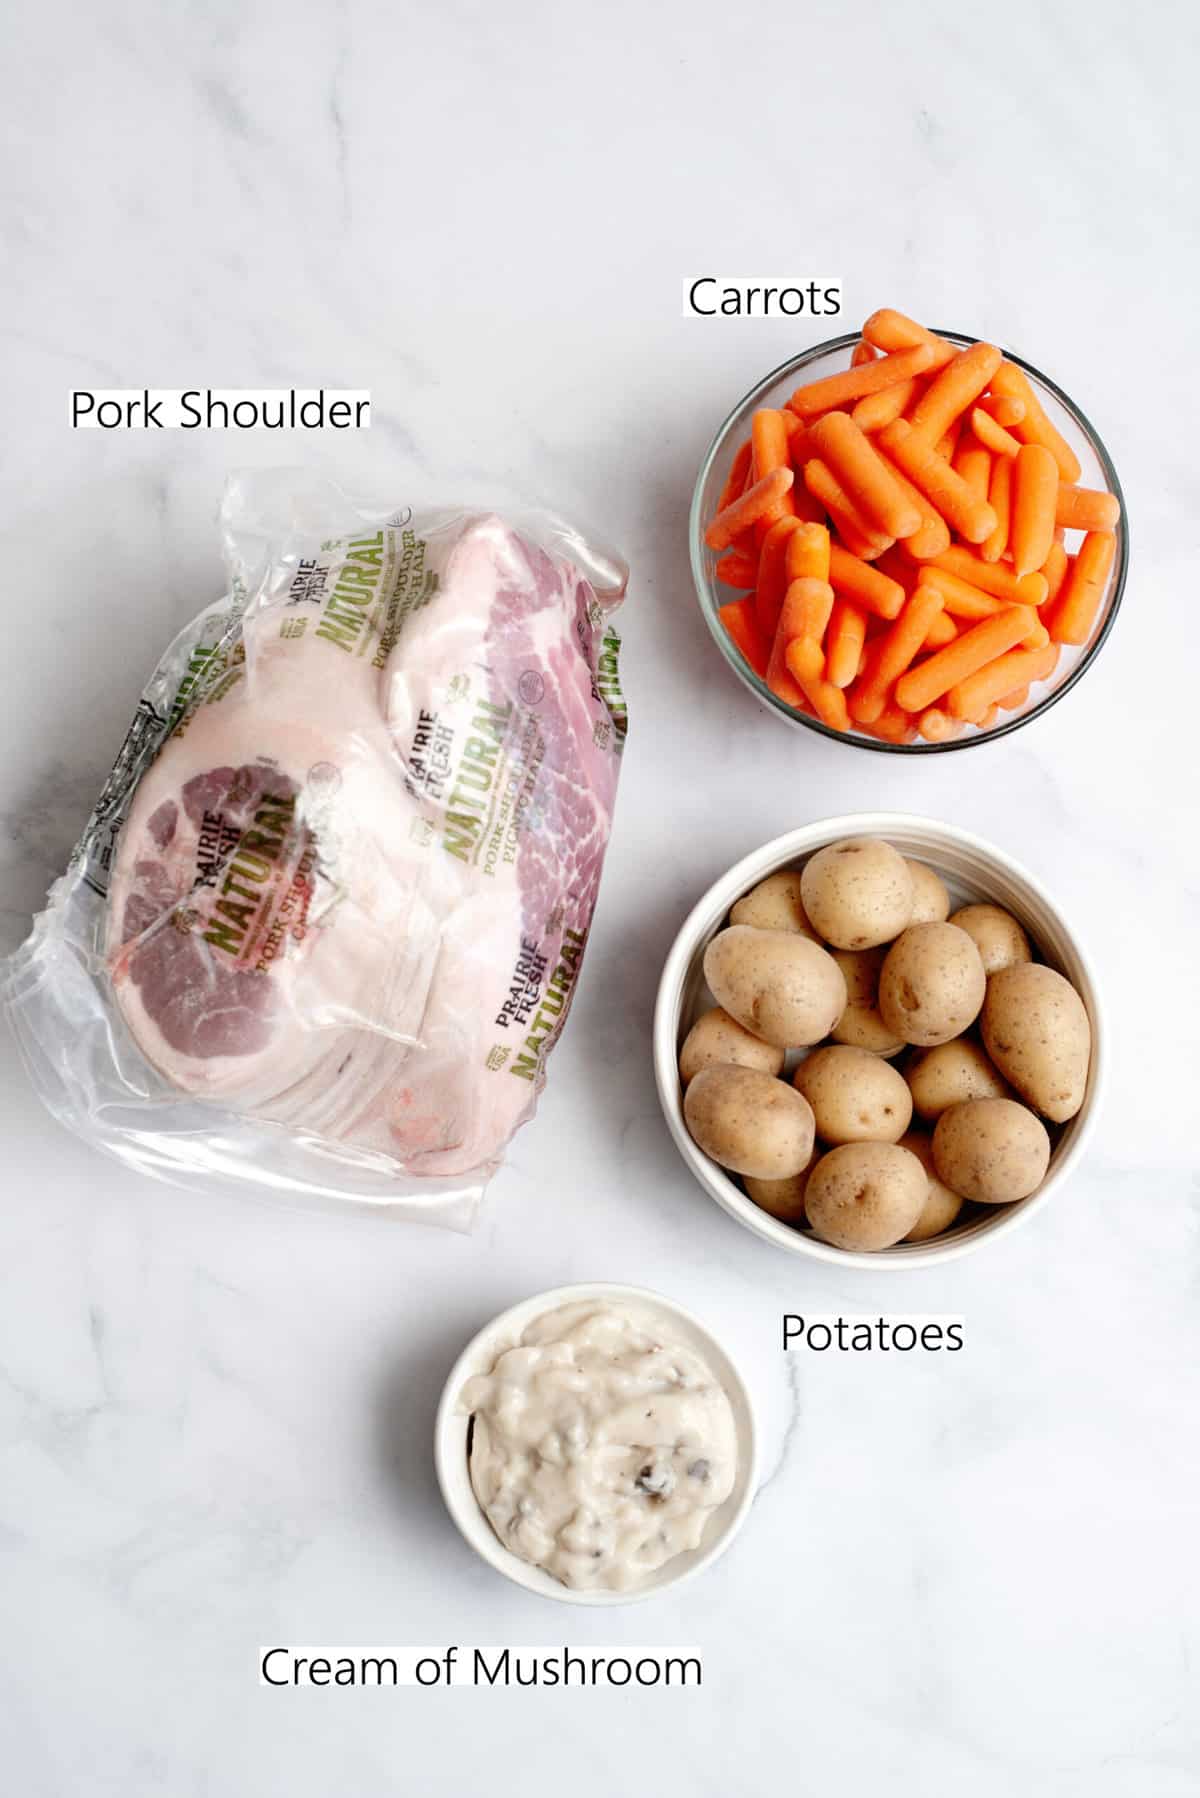 ingredients for slow-cooked pork roast